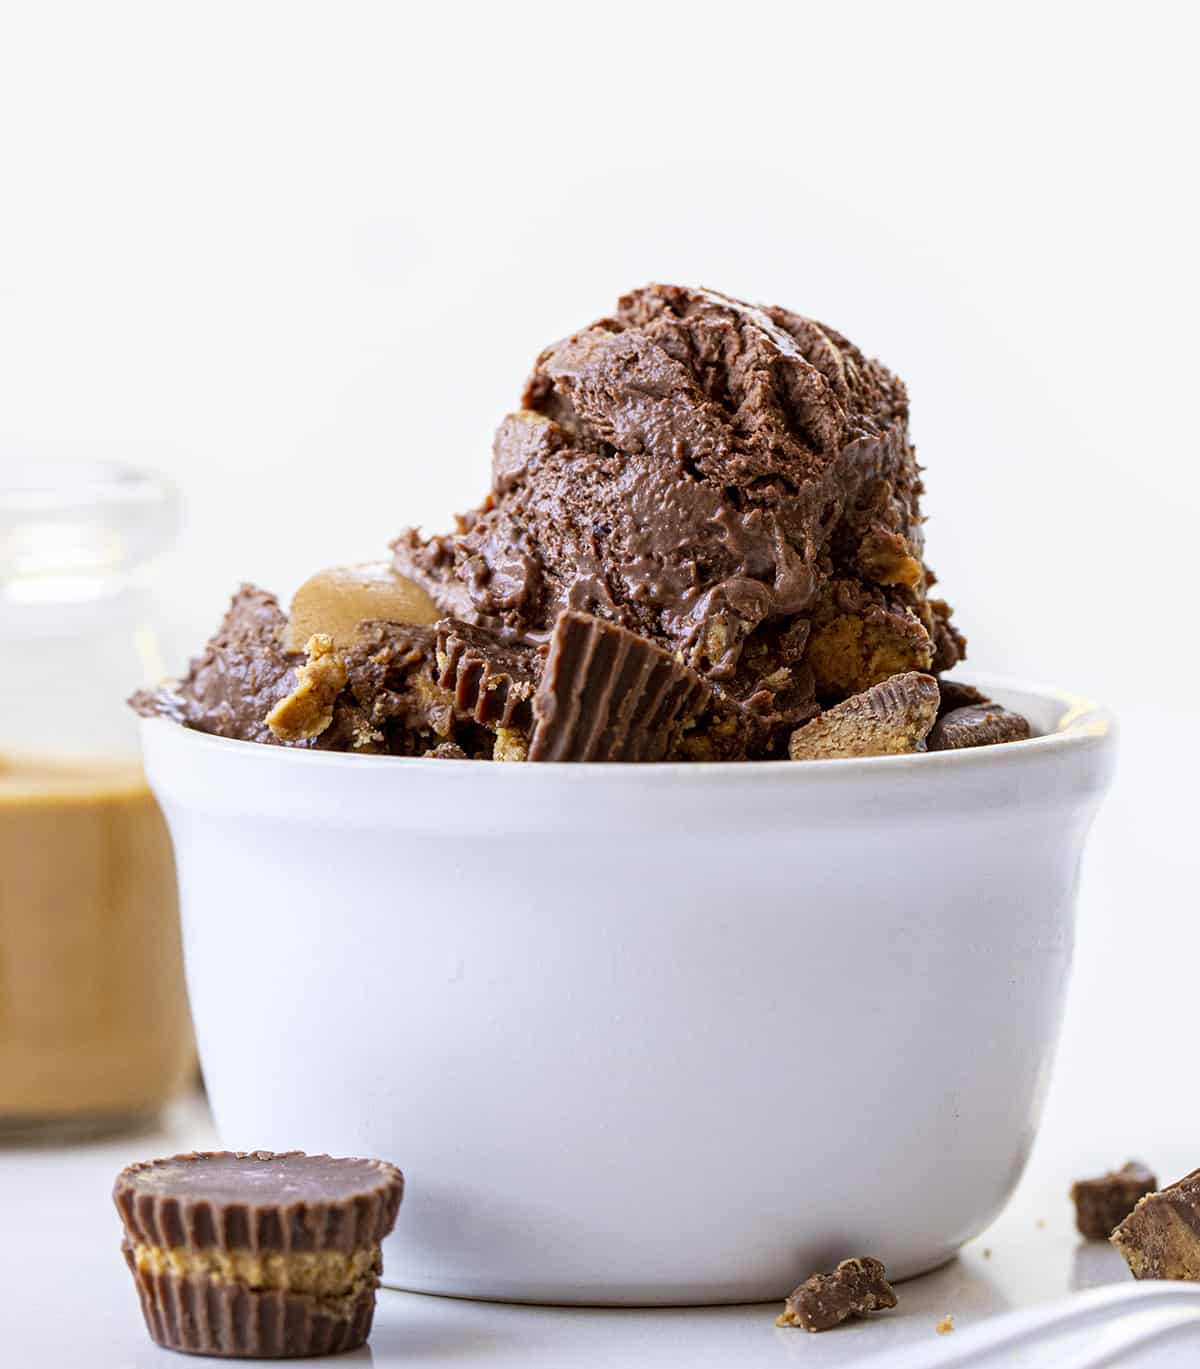 Bowl of Chocolate Peanut Butter ice Cream with Peanut Butter Cups around It. Dessert, Ice Cream, Ice Cream recipes, No Churn Ice Cream Recipes, How to Make Chocolate Ice Cream, Chocolate Peanut Butter ice Cream, No Churn Chocolate Ice Cream, No Bake Desserts, Summer Desserts, Homemade Ice Cream, Homemade Chocolate Ice Cream, i am baker, iambaker